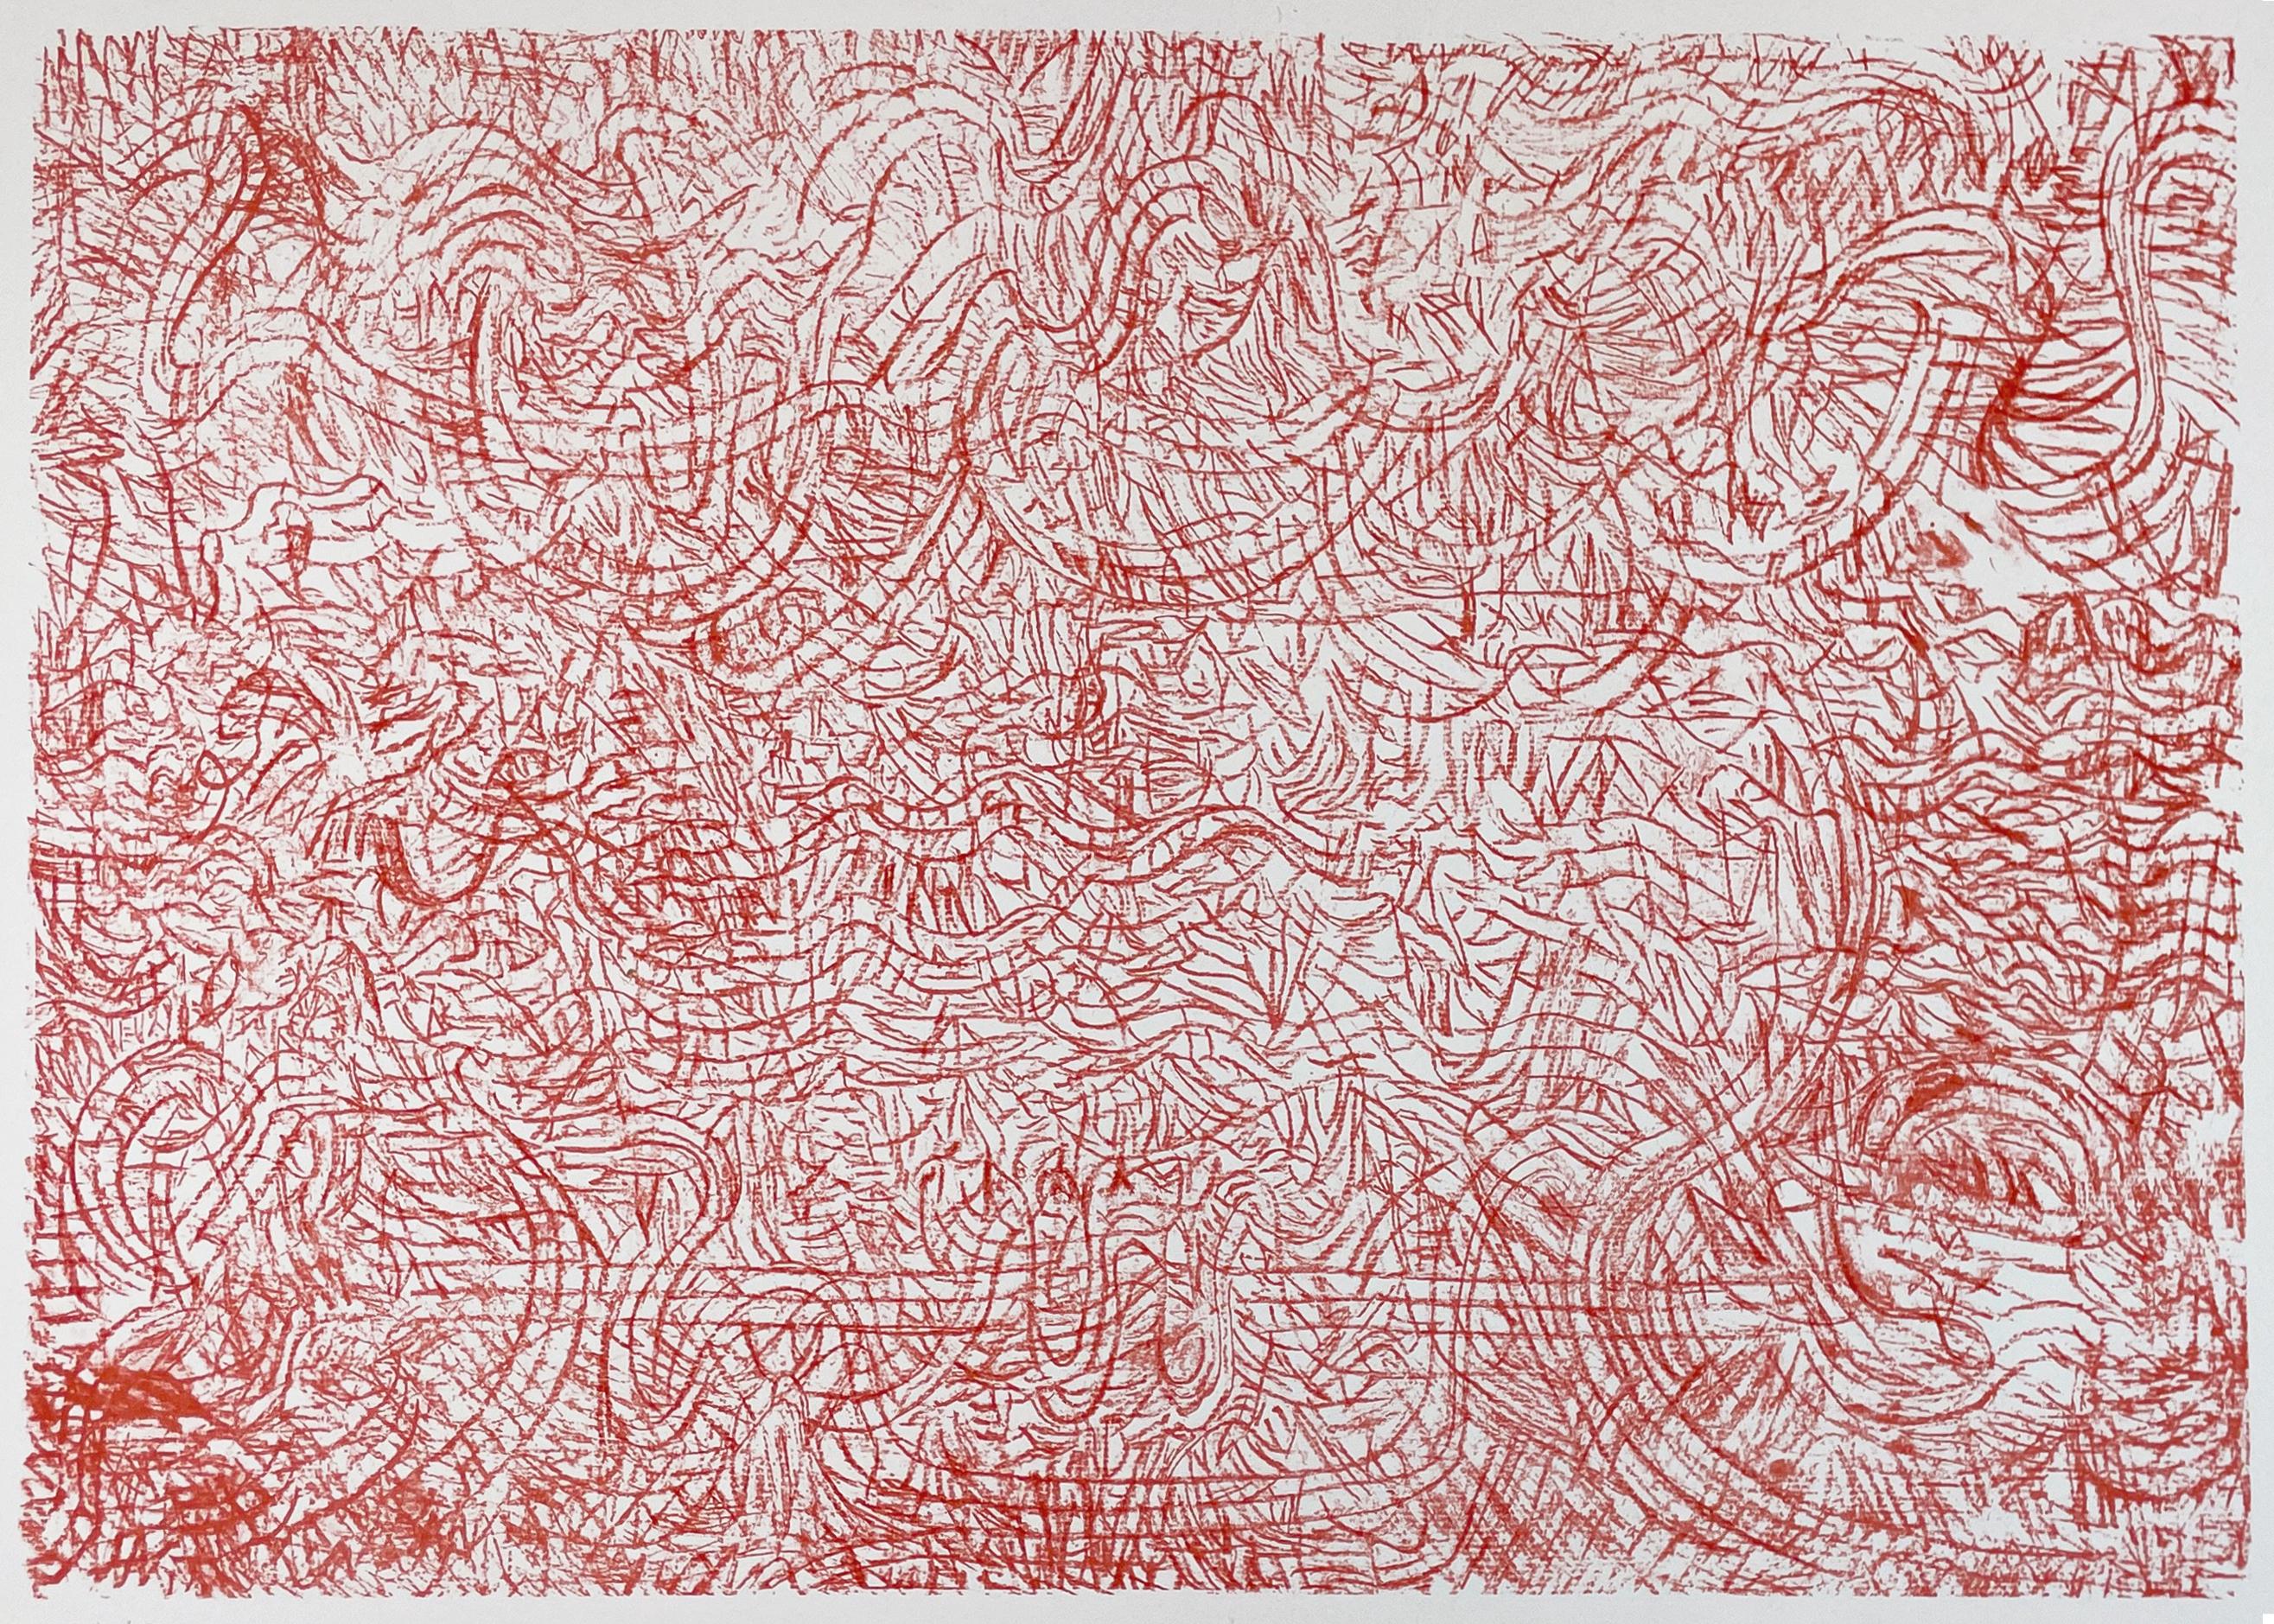 An expressive, jubilant abstract composition in vibrant scarlet red, with Mark Tobey’s calligraphy-inspired mark-making creating a textured matrix of lines that seems to wave and swirl.

Mark Tobey, Mandarin and Flowers 1973
Image 27 1/8 x 19 1/2